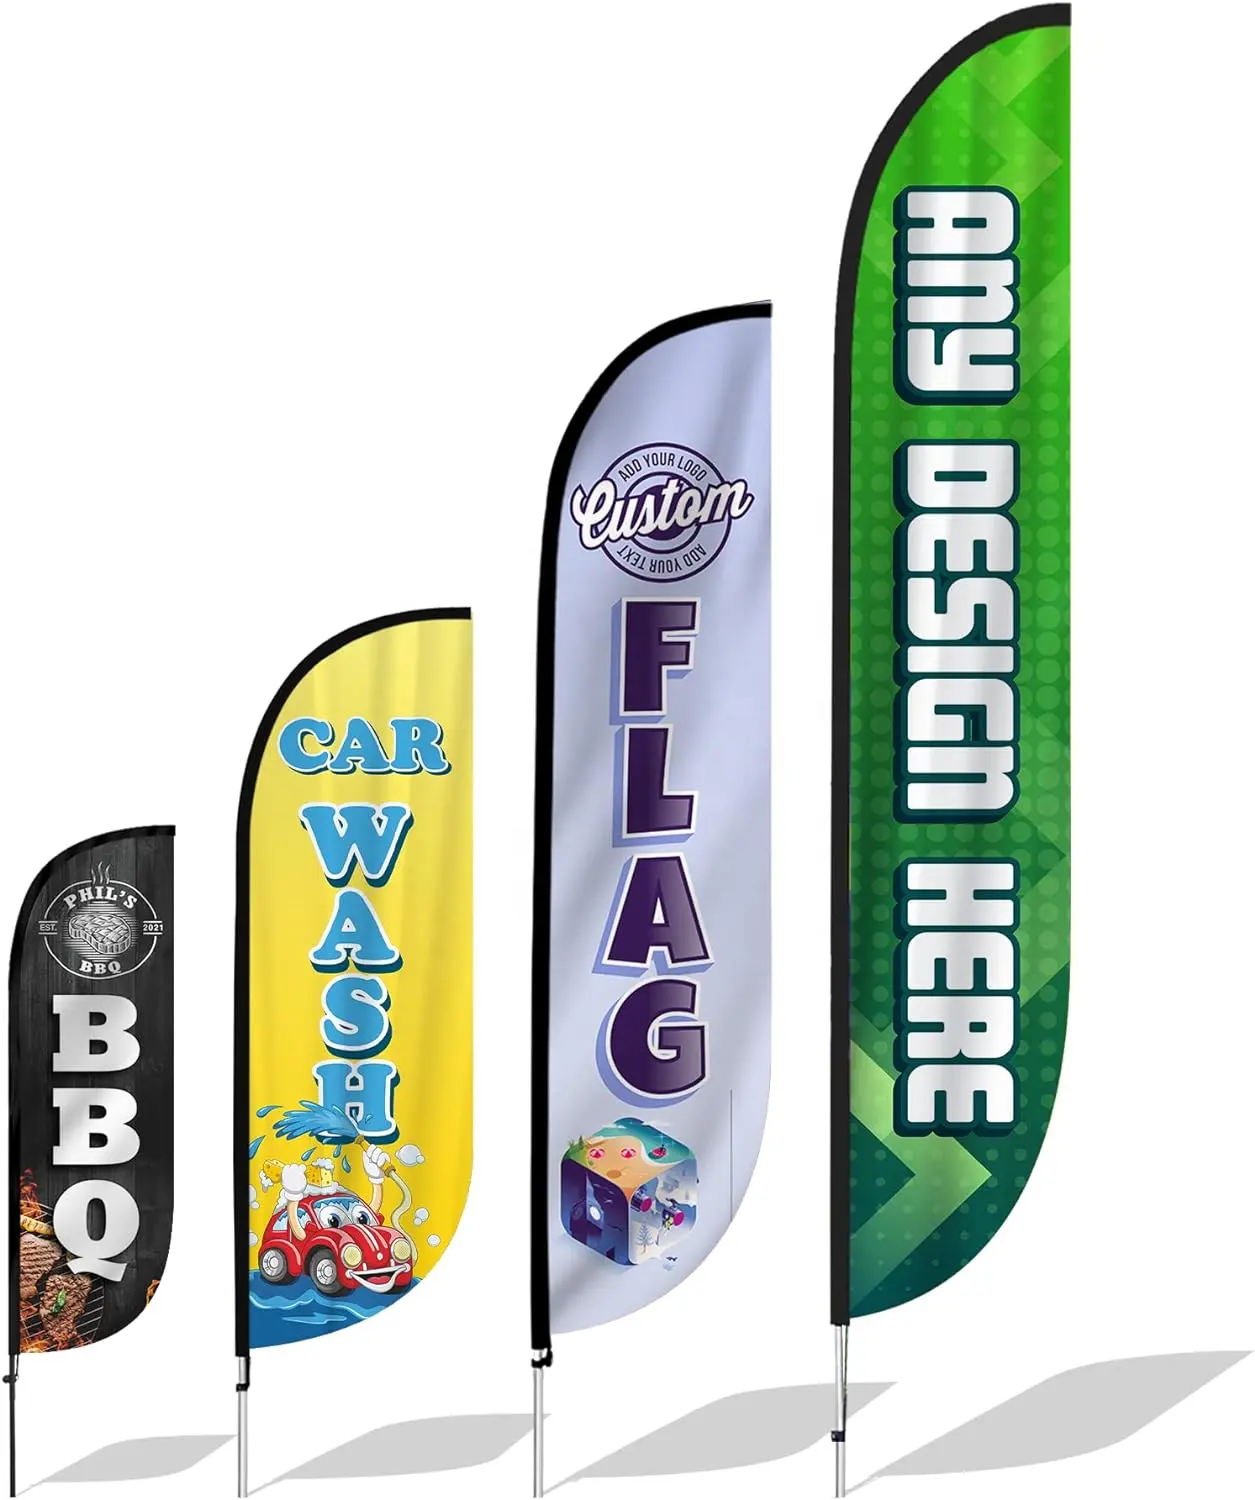 Teardrop Flying Banner Beach Flagpole Sale Now Open House Car Wash Swooper Custom Printed Feather Flag With Spike Base